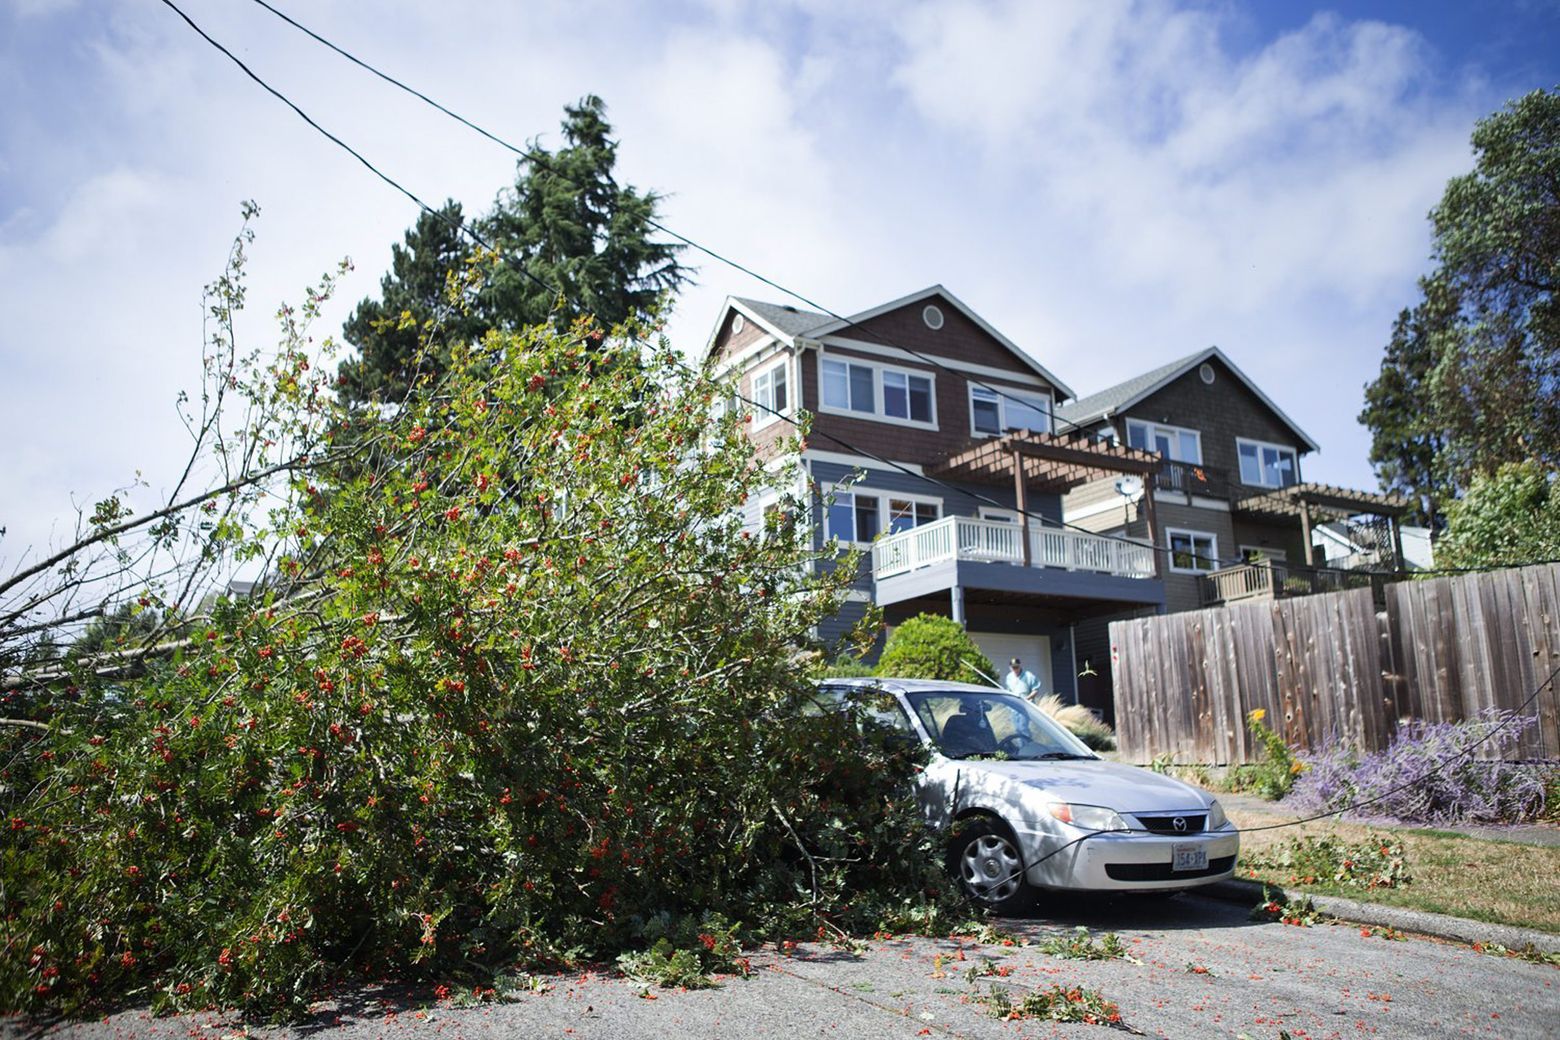 A resident surveys the damage after a large tree and partial power lines fell onto a car on NE 60th St. (Lindsey Wasson / The Seattle Times)